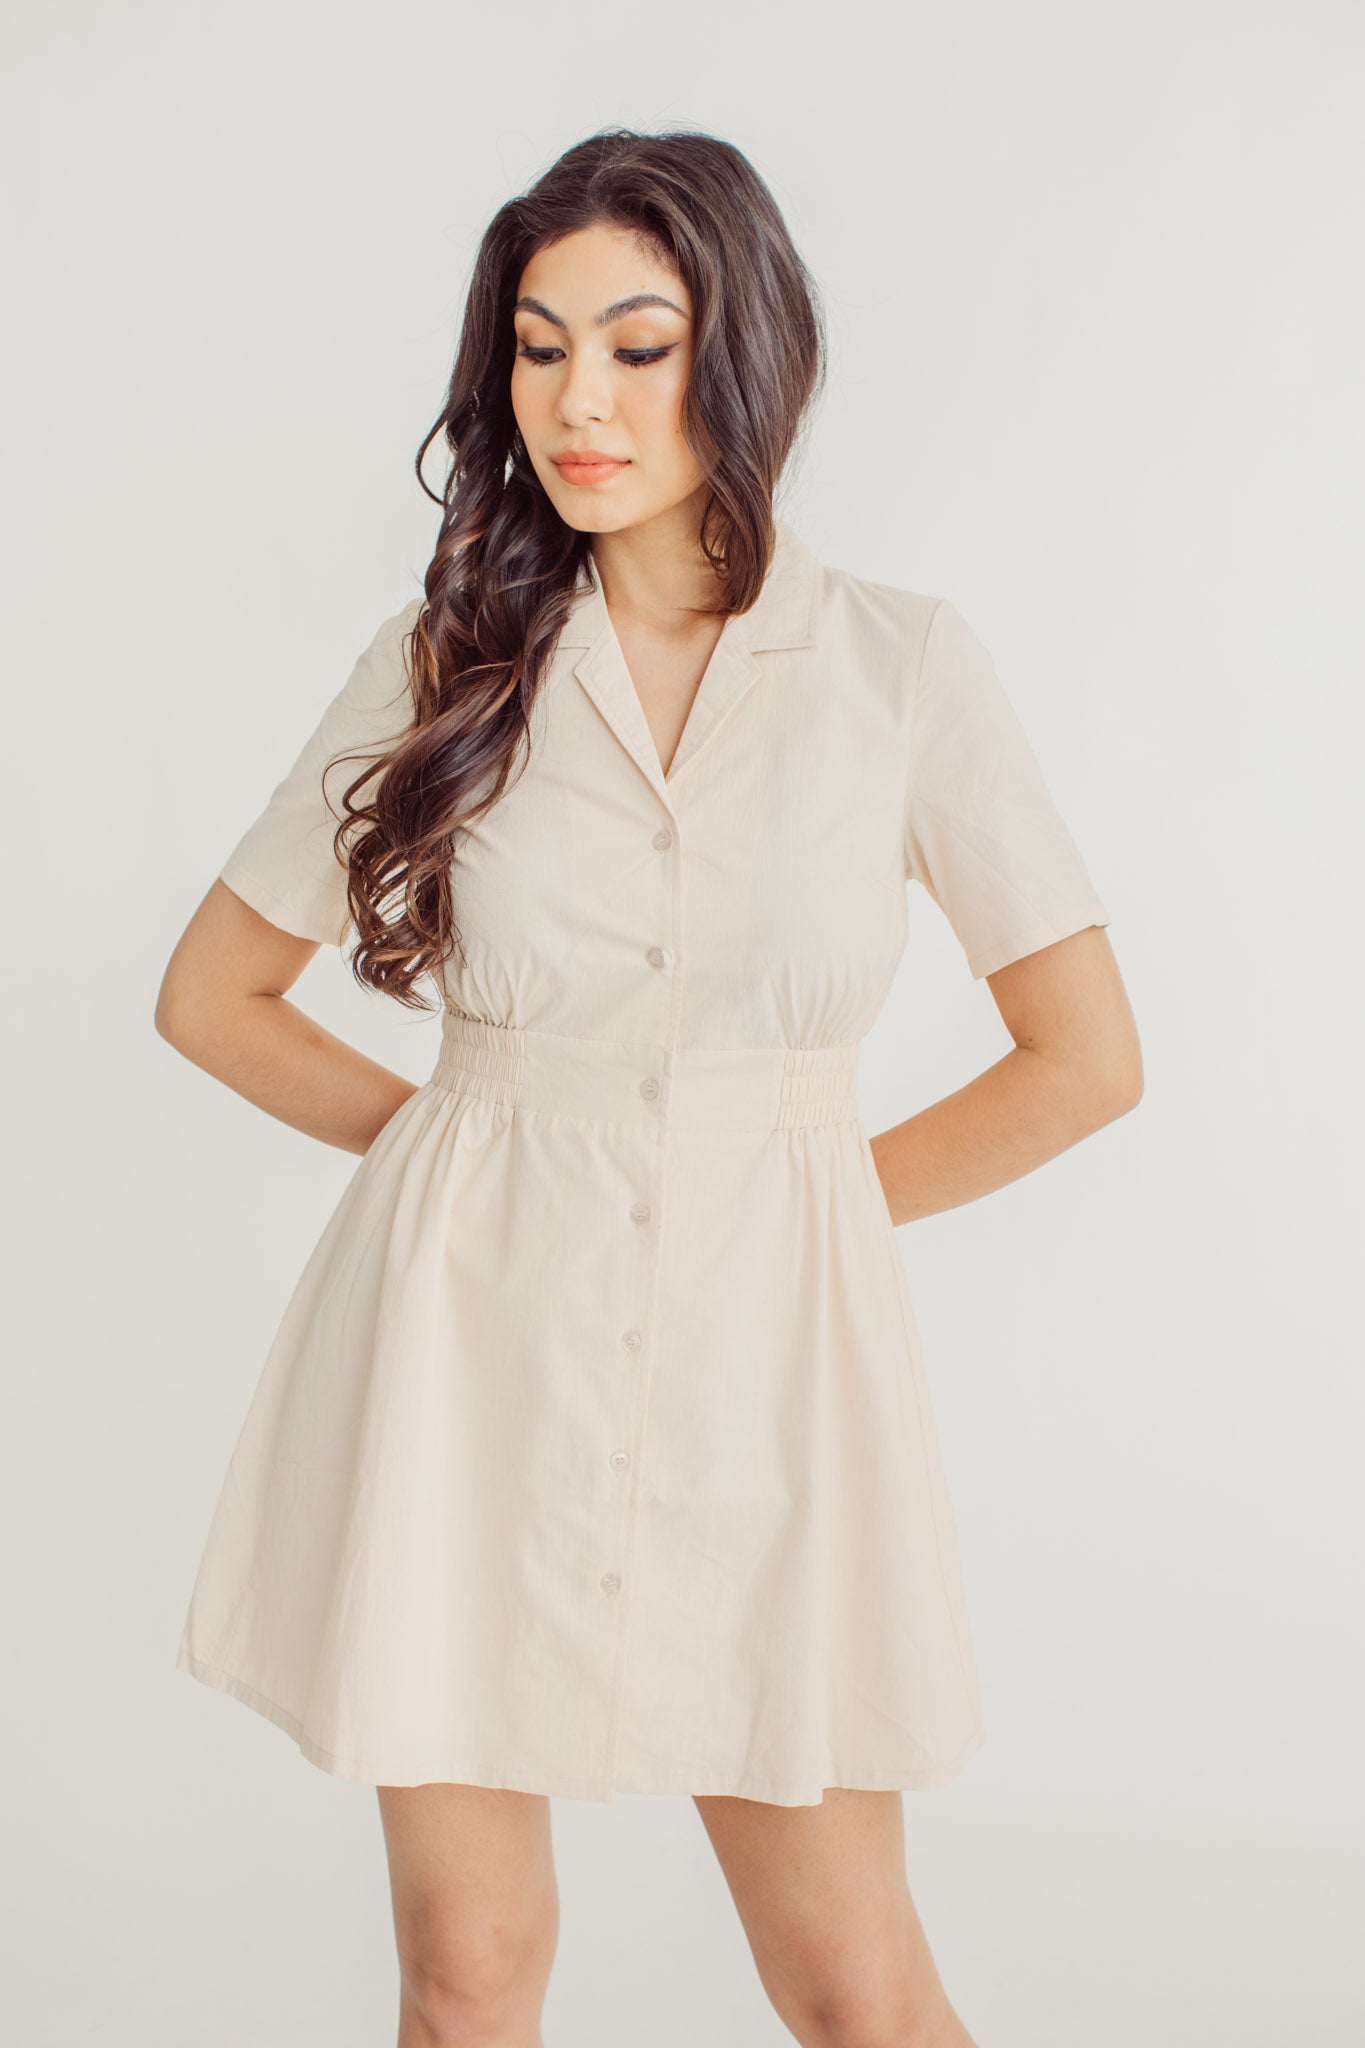 Vanessa Button Down with Cinched Waist Dress - Mossimo PH